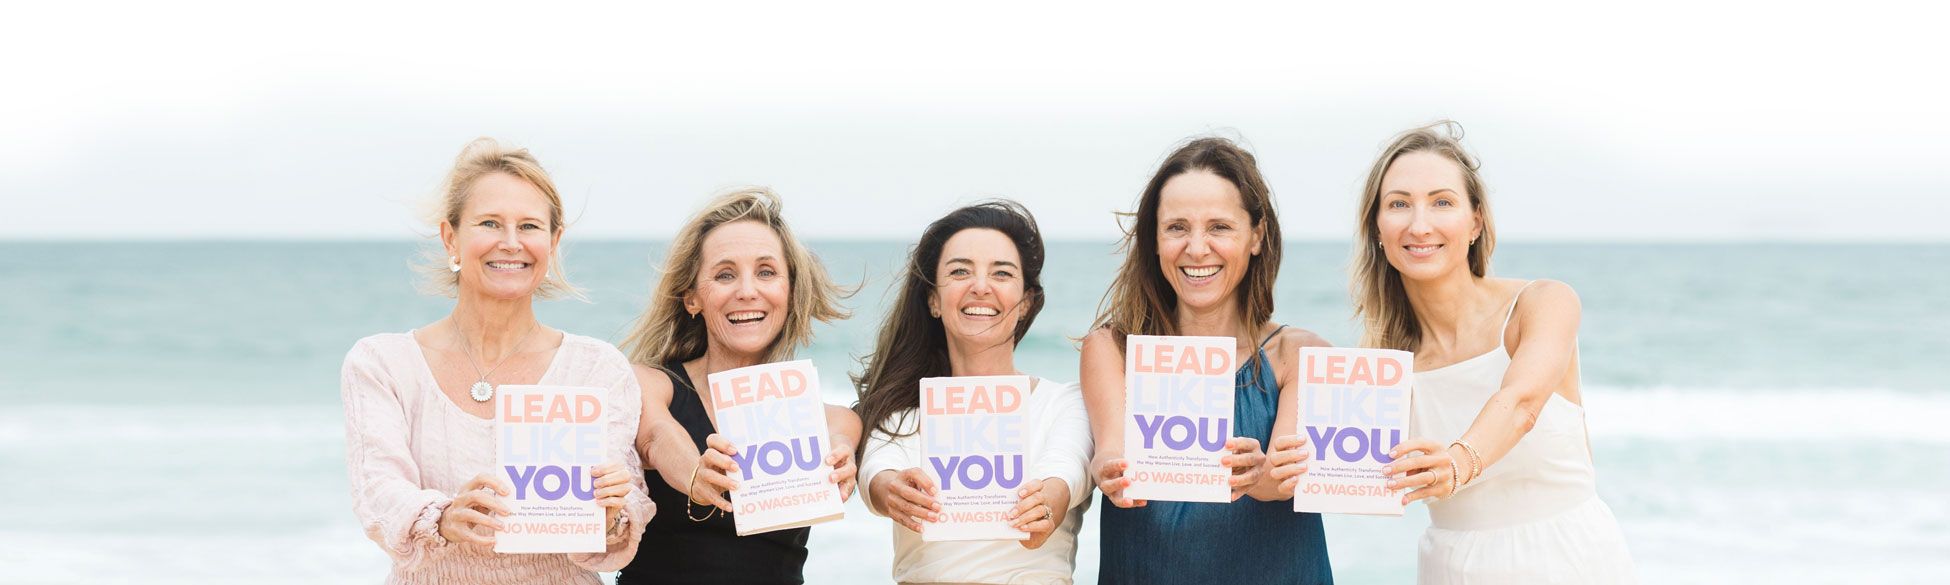 ‘Lead Like You’ By Jo Wagstaff Empowers Women Leaders With Authenticity